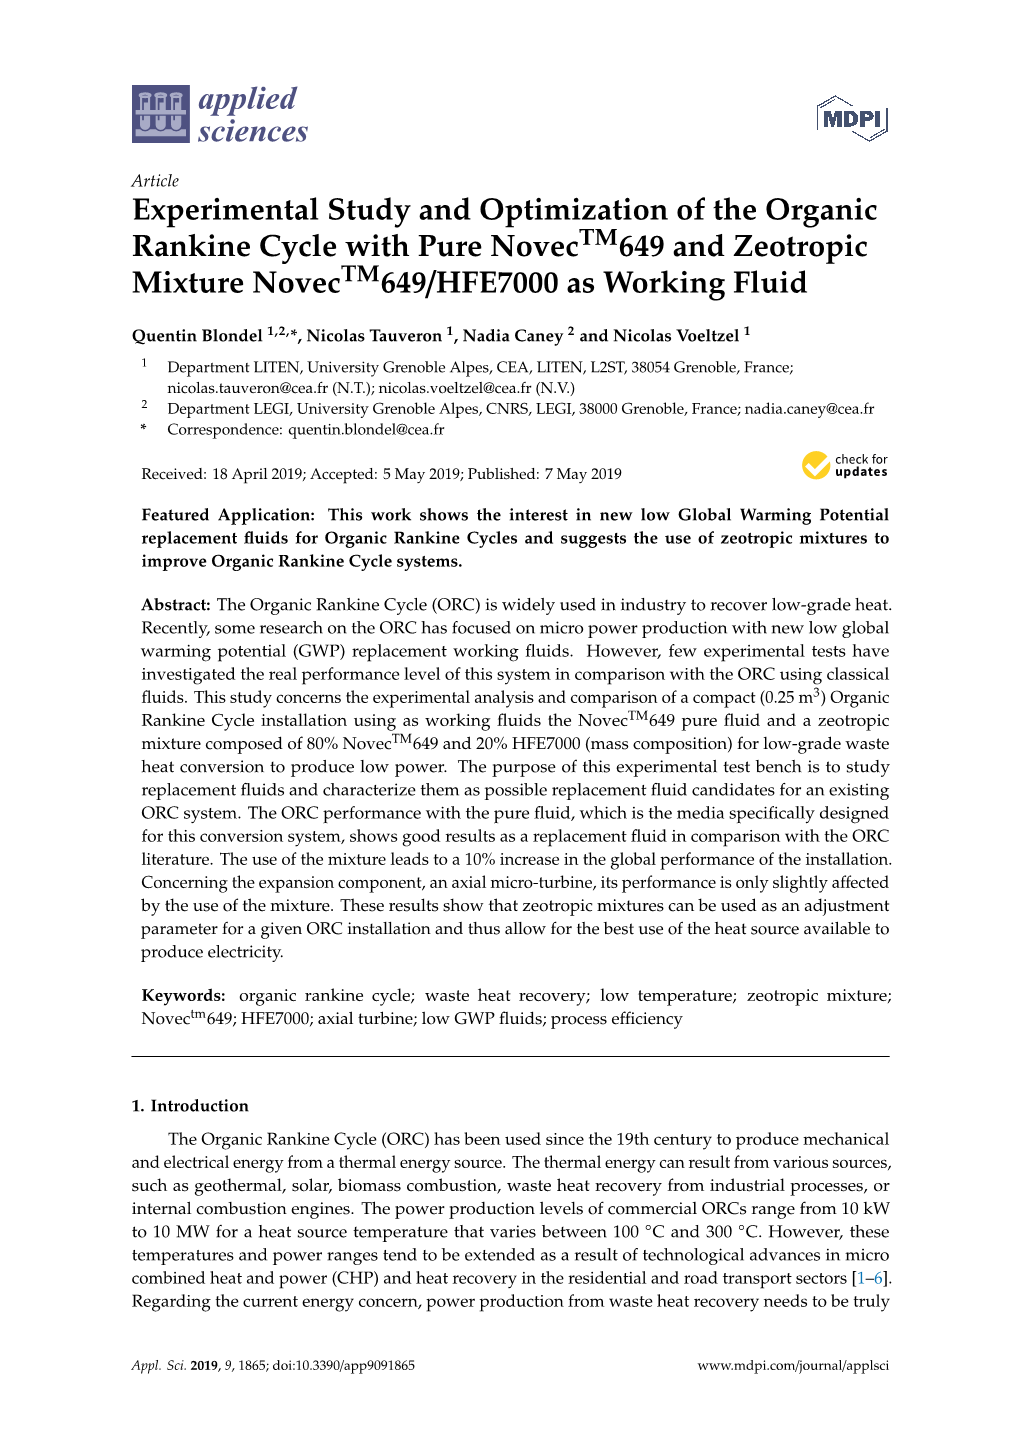 Experimental Study and Optimization of the Organic Rankine Cycle with Pure Novectm649 and Zeotropic Mixture Novectm649/HFE7000 As Working Fluid